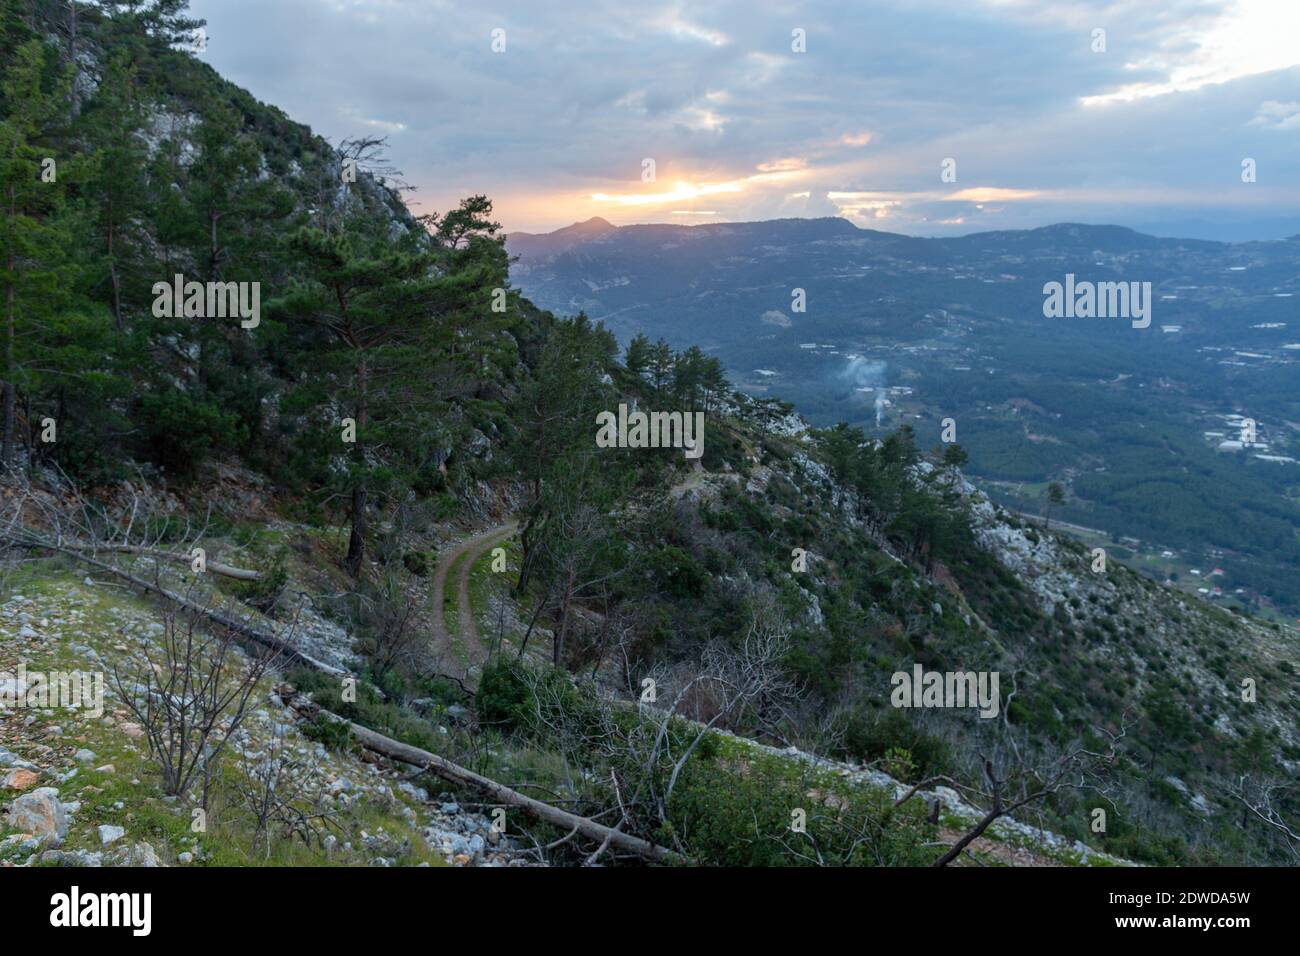 Scenic View Of Mountains Against Sky During Sunset Stock Photo